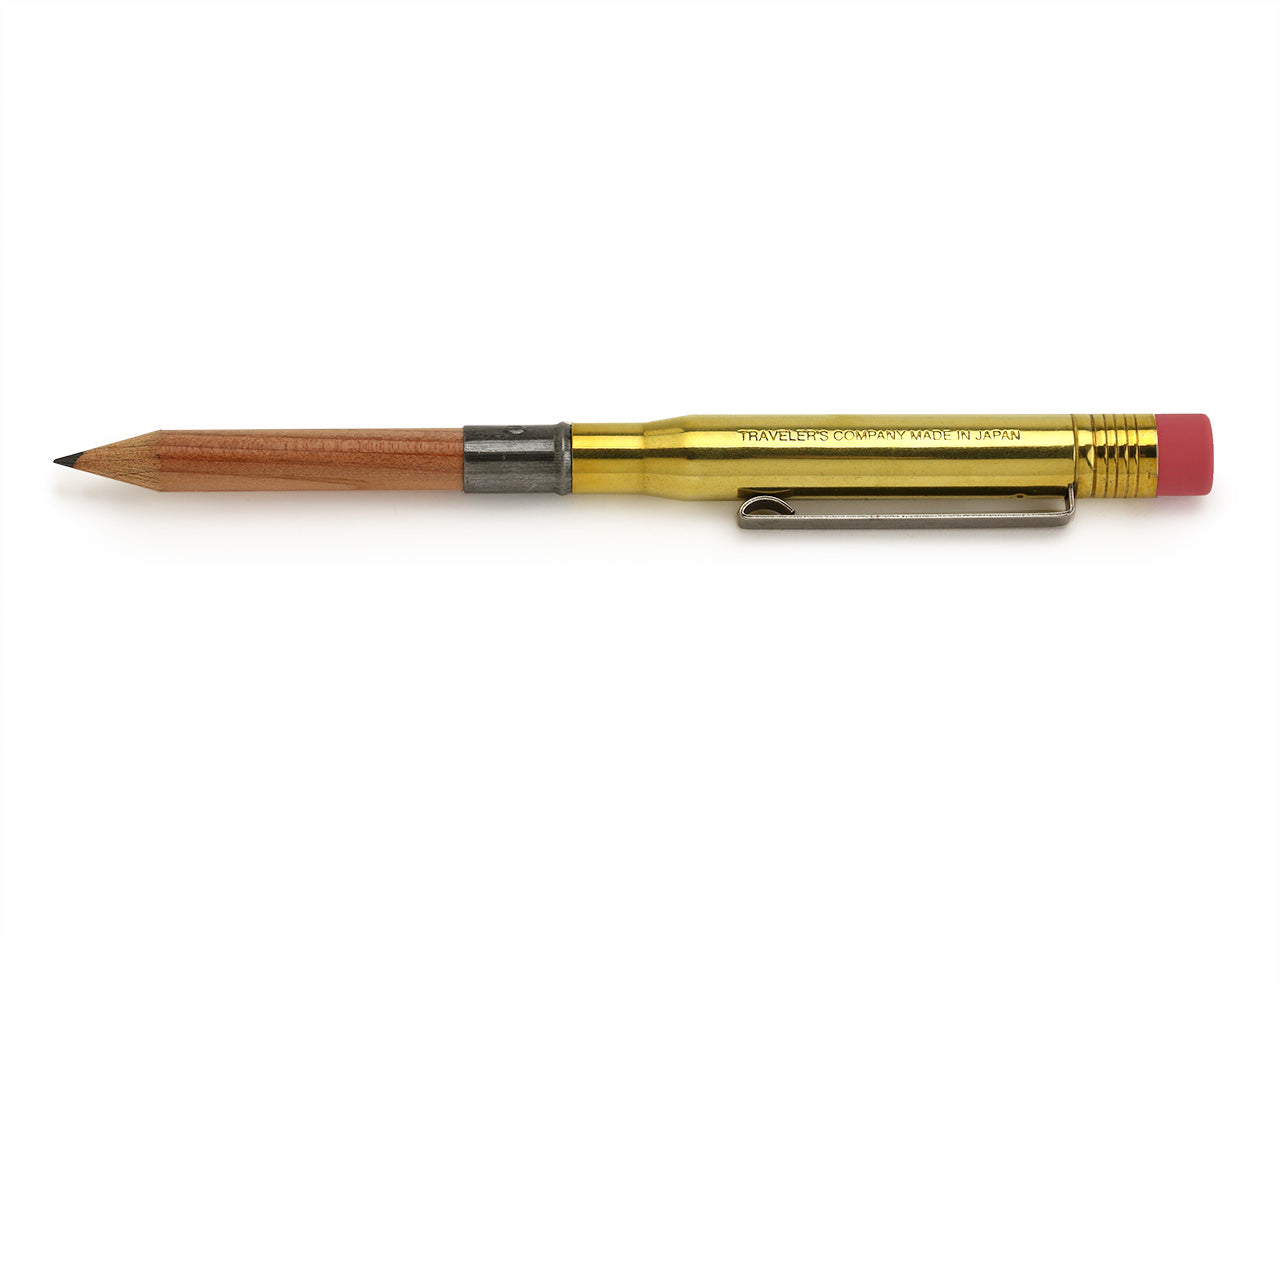 Brass pencil fully assembled with clip and eraser on one end, and the wooden pencil in the other